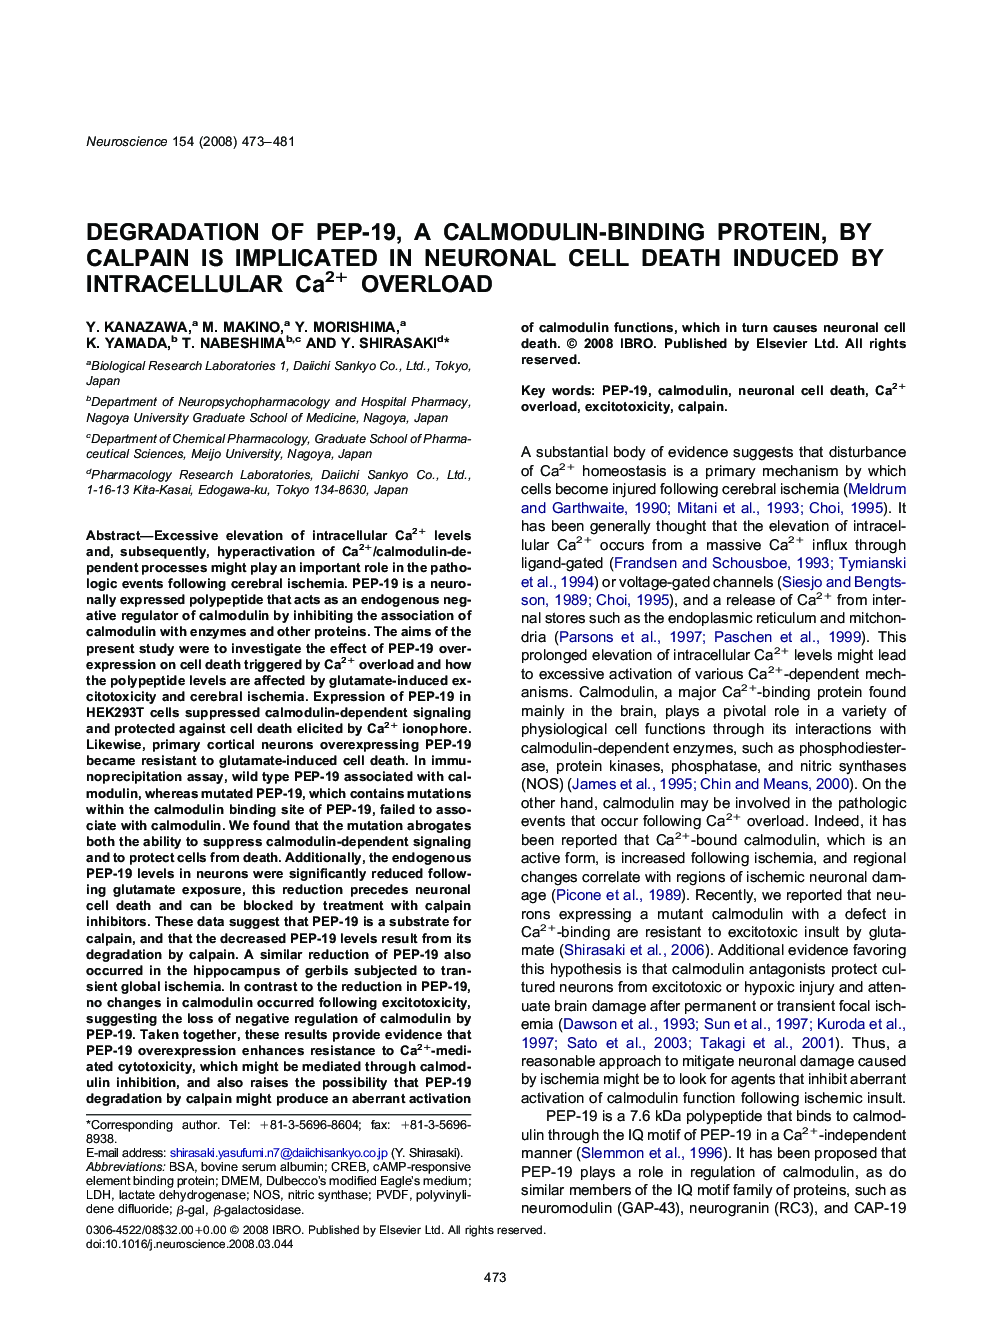 Degradation of PEP-19, a calmodulin-binding protein, by calpain is implicated in neuronal cell death induced by intracellular Ca2+ overload